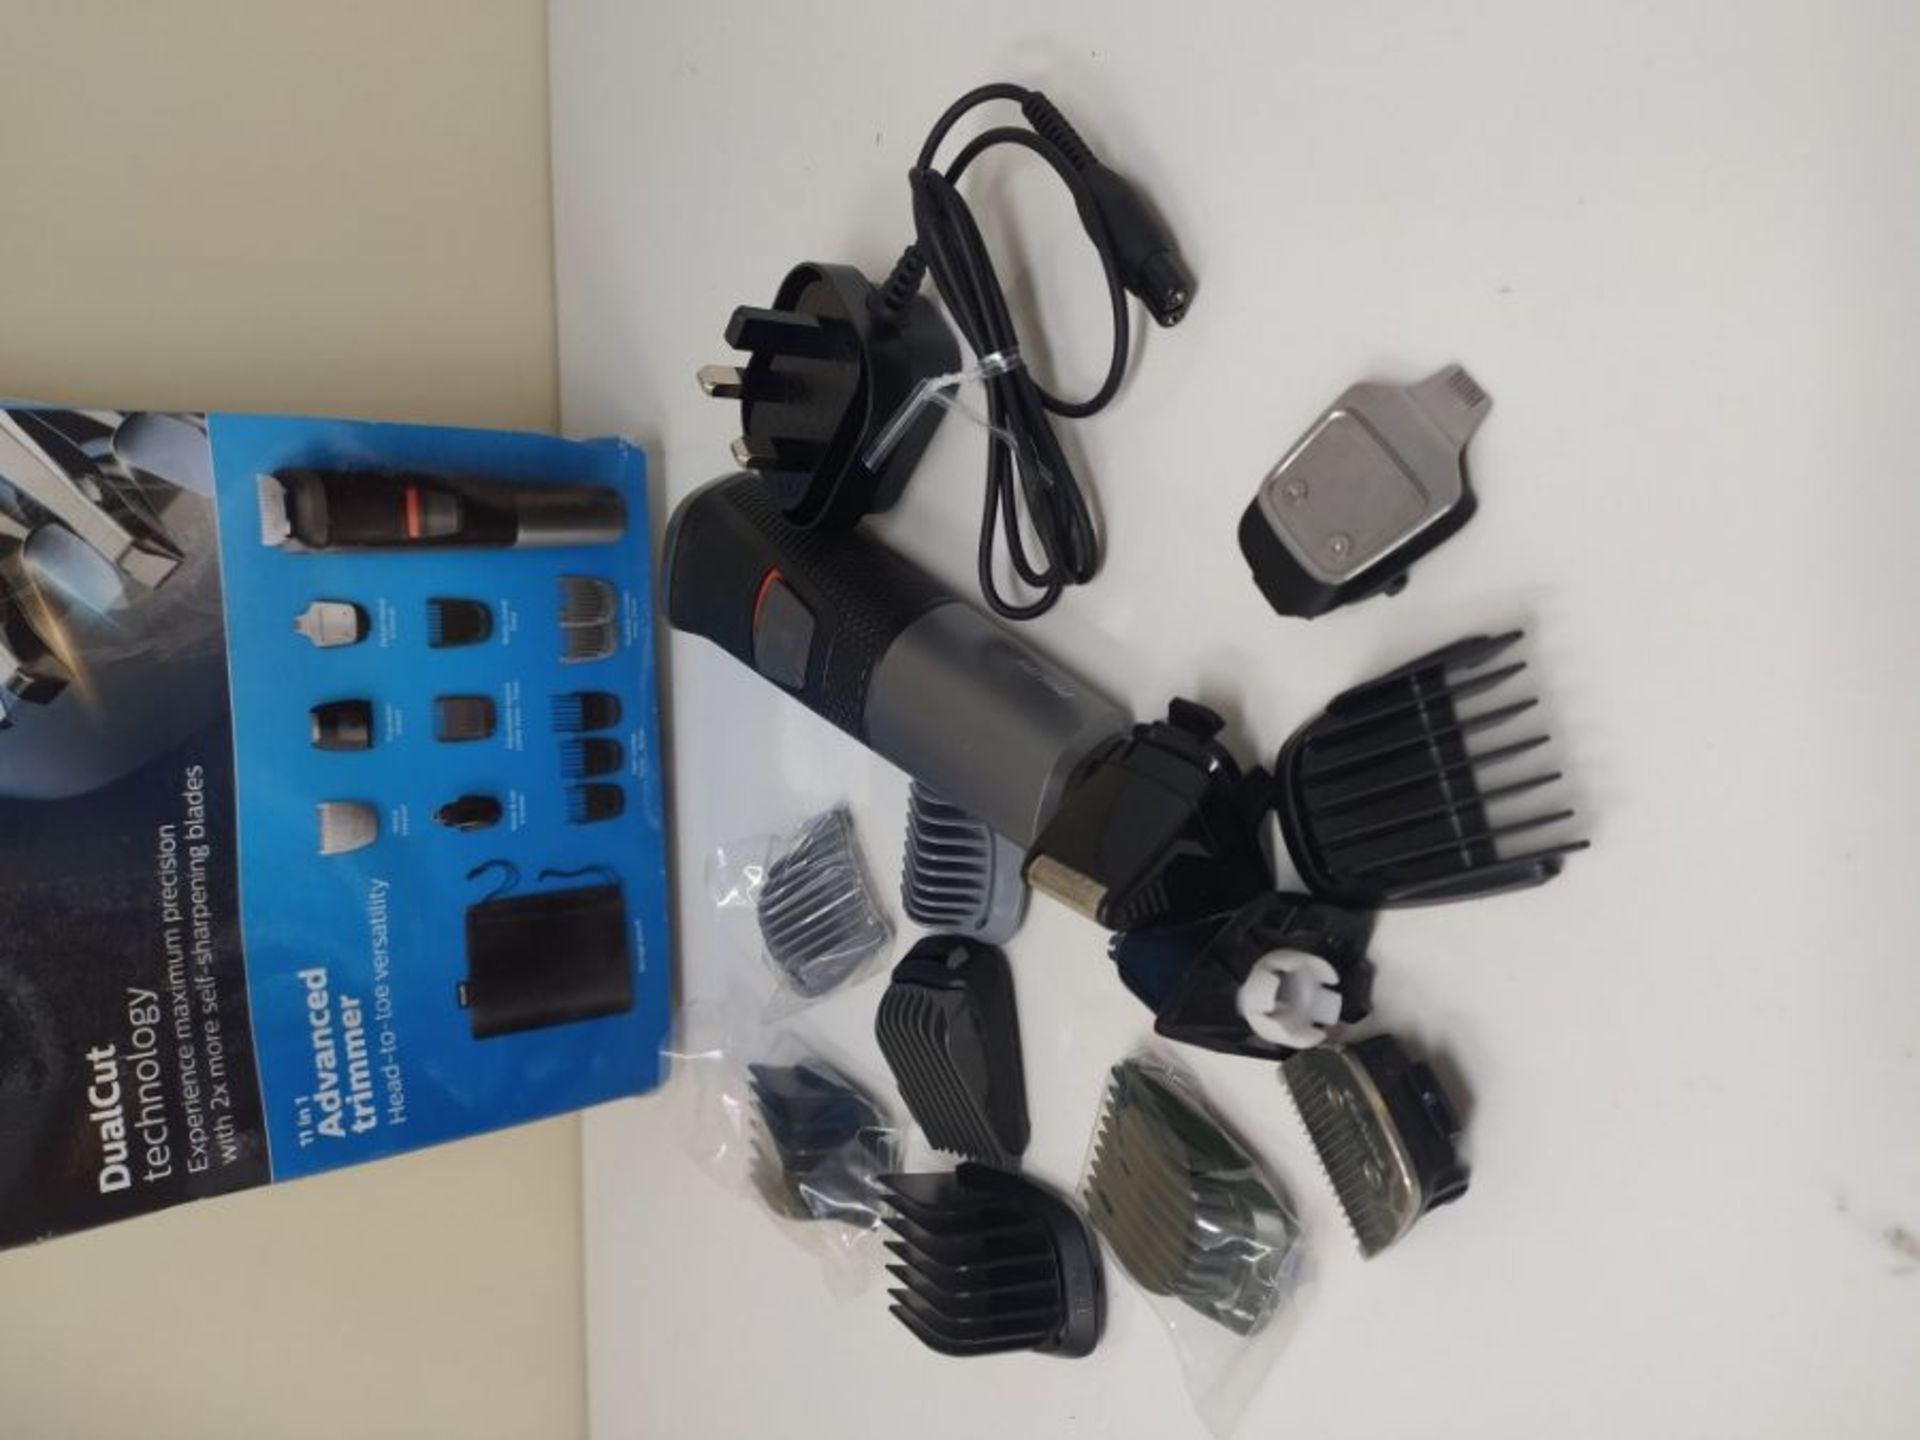 Philips 11-in-1 All-In-One Trimmer, Series 5000 Grooming Kit, Beard Trimmer, Hair Clip - Image 2 of 2